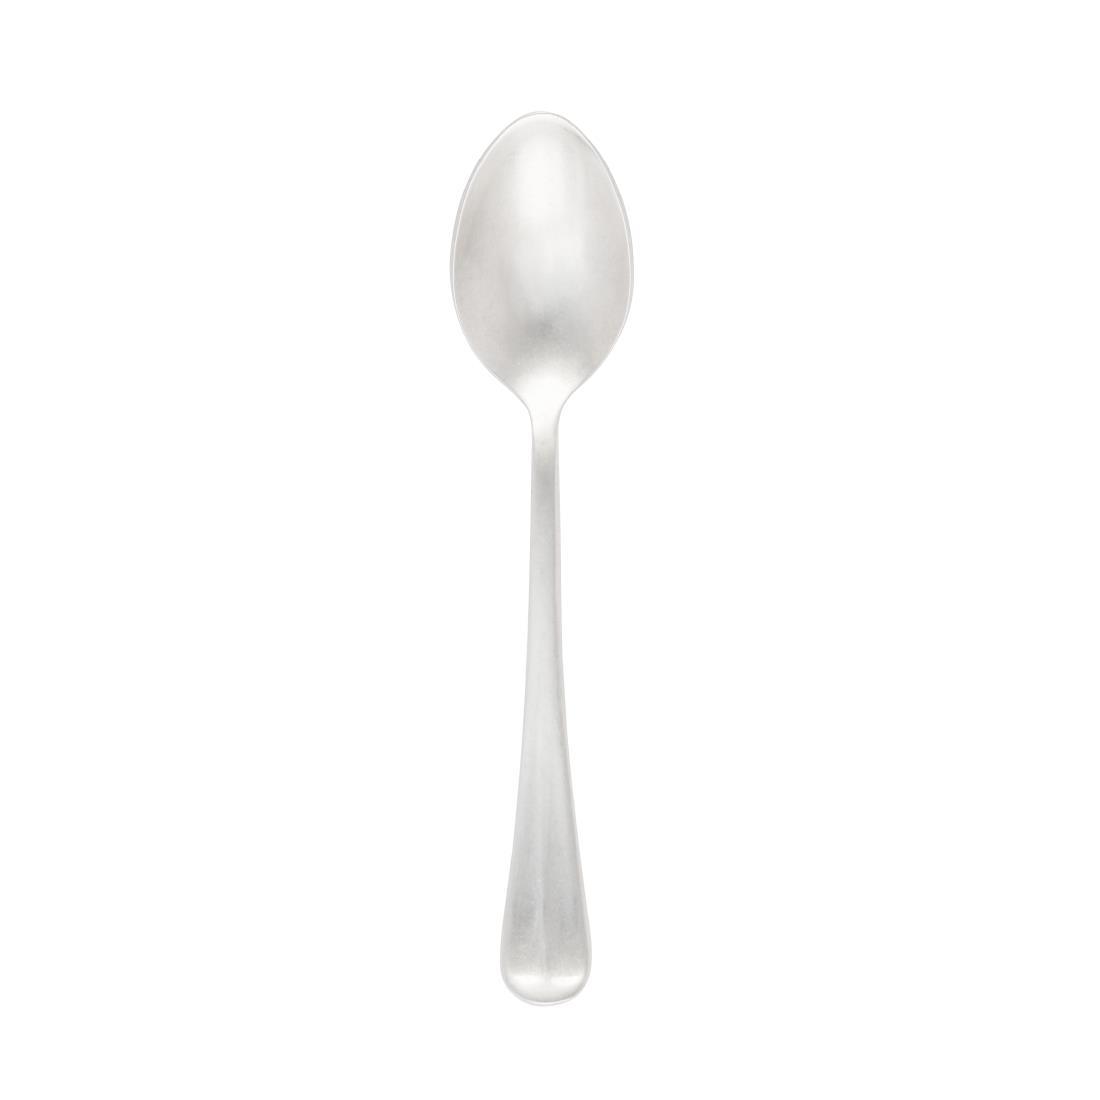 Pintinox Baguette Stonewashed Teaspoon (Pack of 12) - GN786  - 2